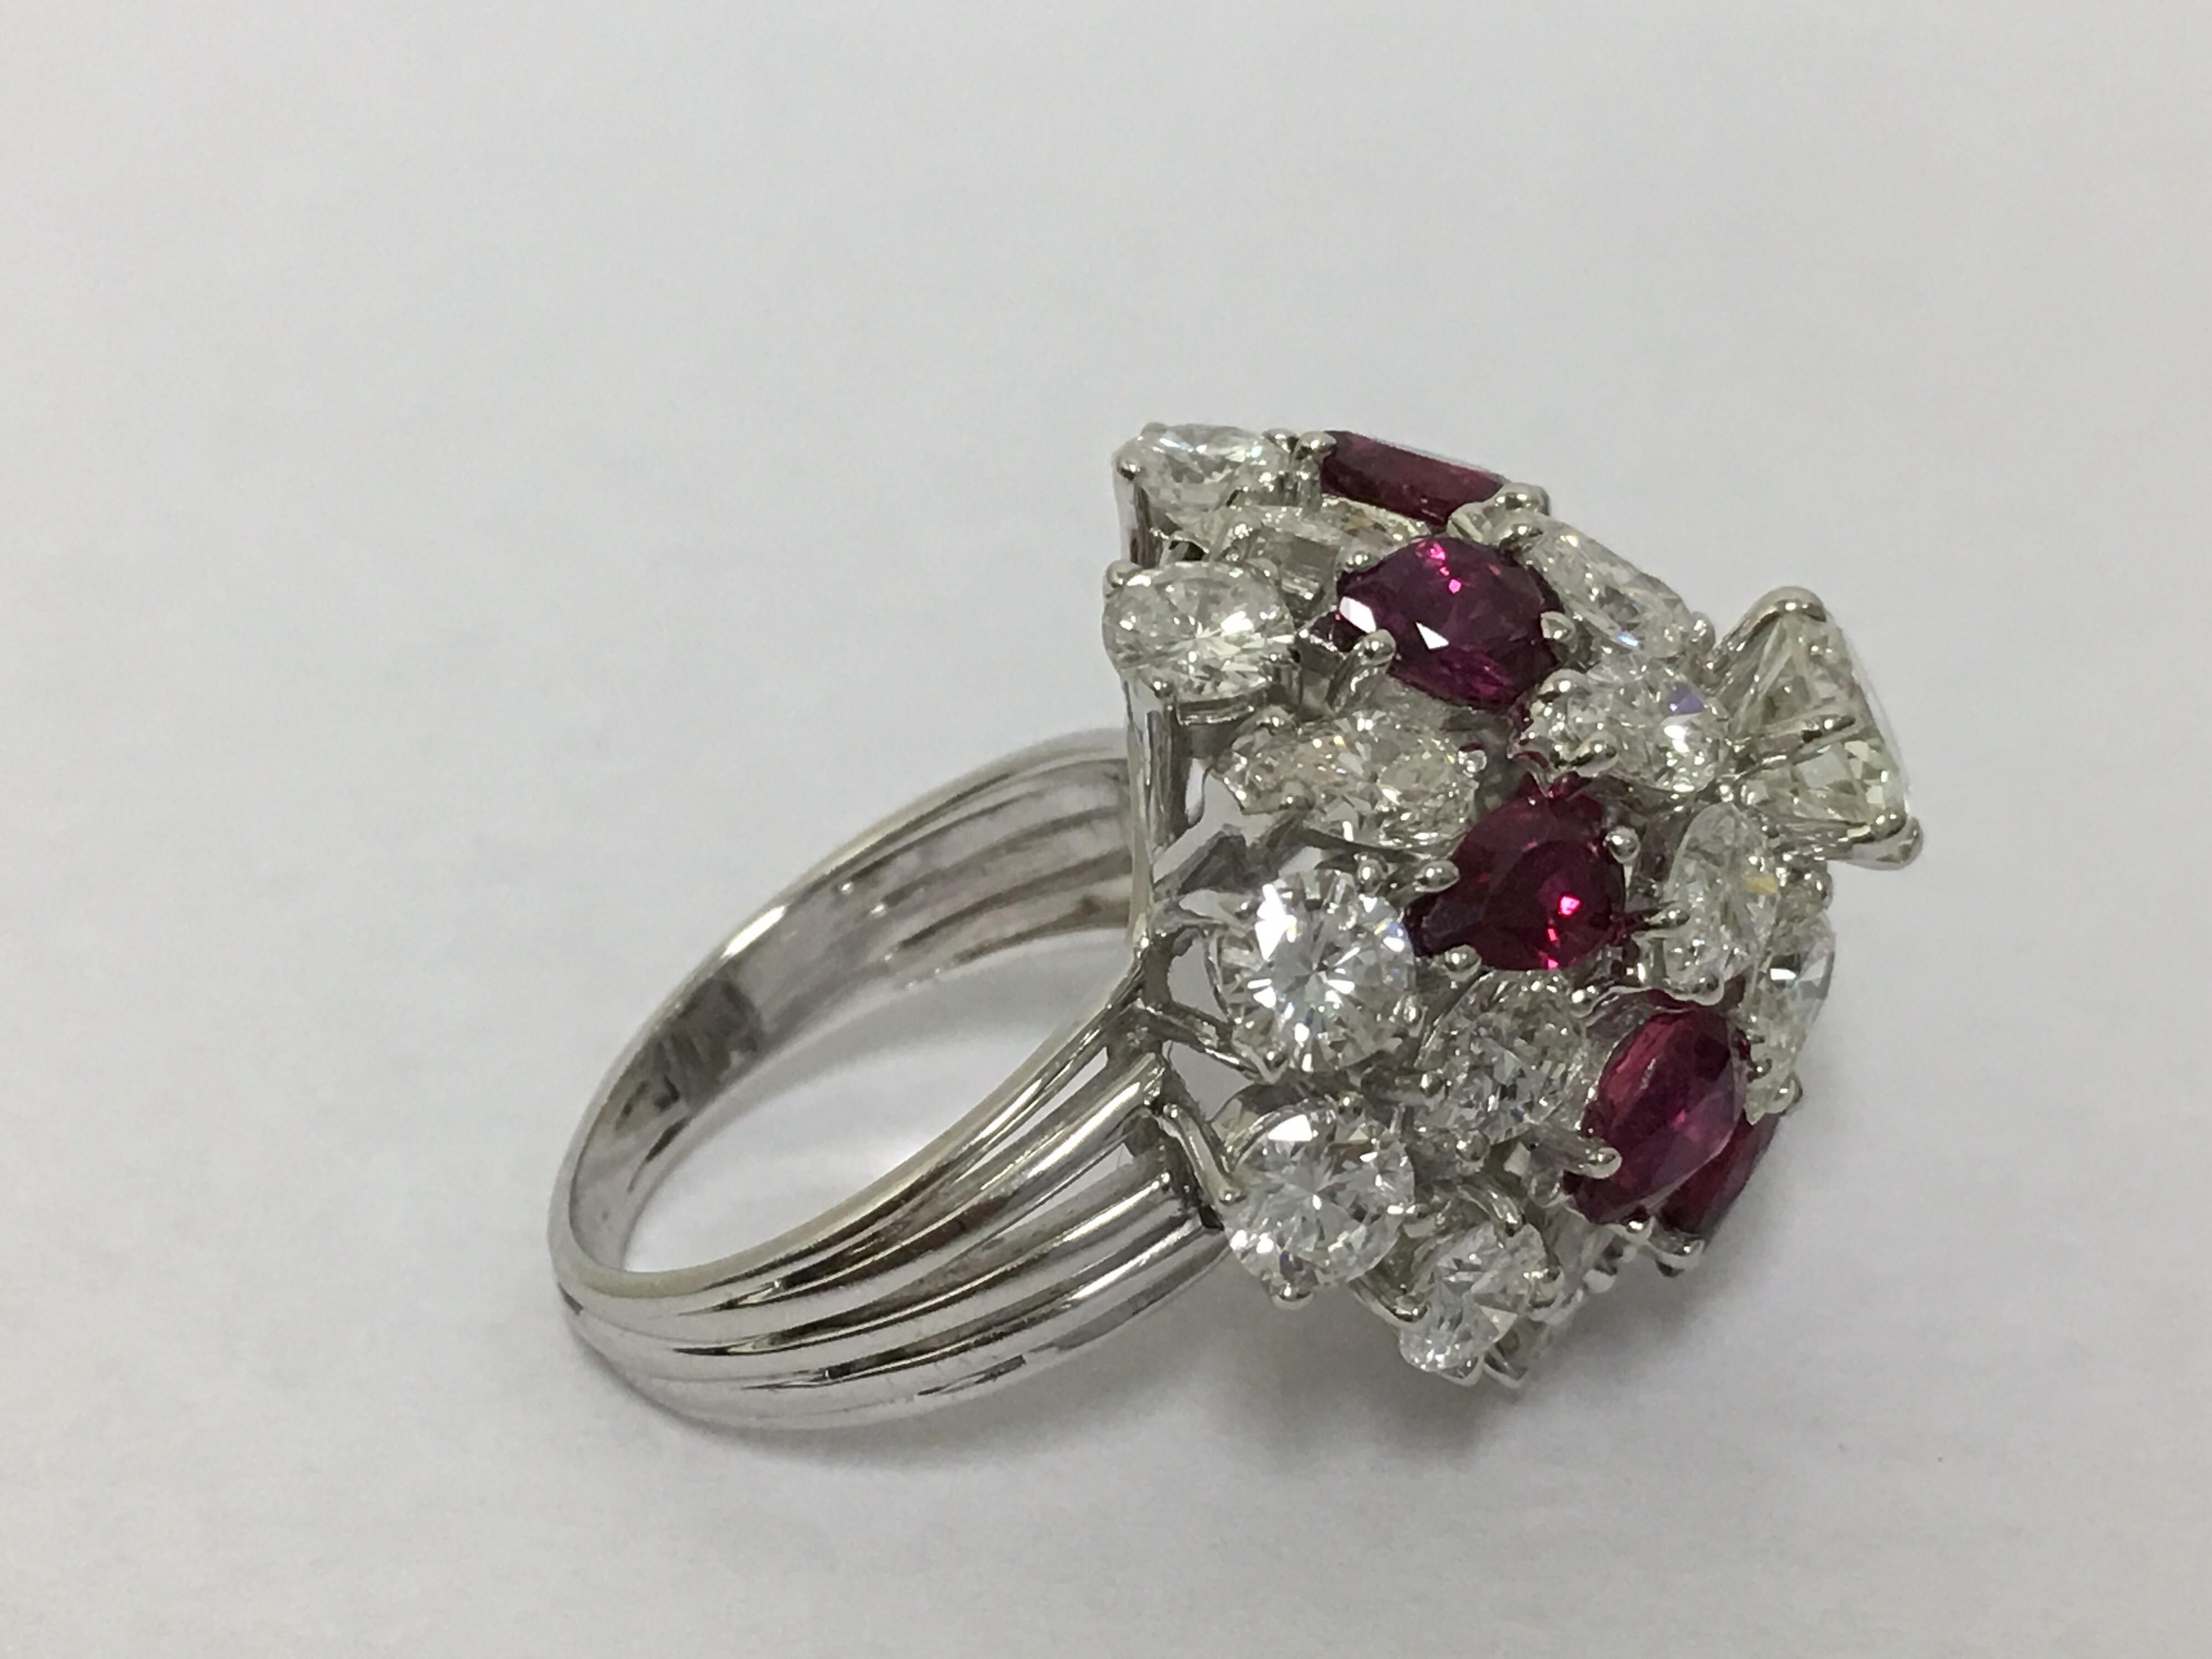 Natural no heat, not dyed and non treated Ruby and Diamonds set in Platinum.
One of a kind Dome design Ruby and Diamonds weight approx 8.5 Carat.
Size is 6.5 and can be resized.
